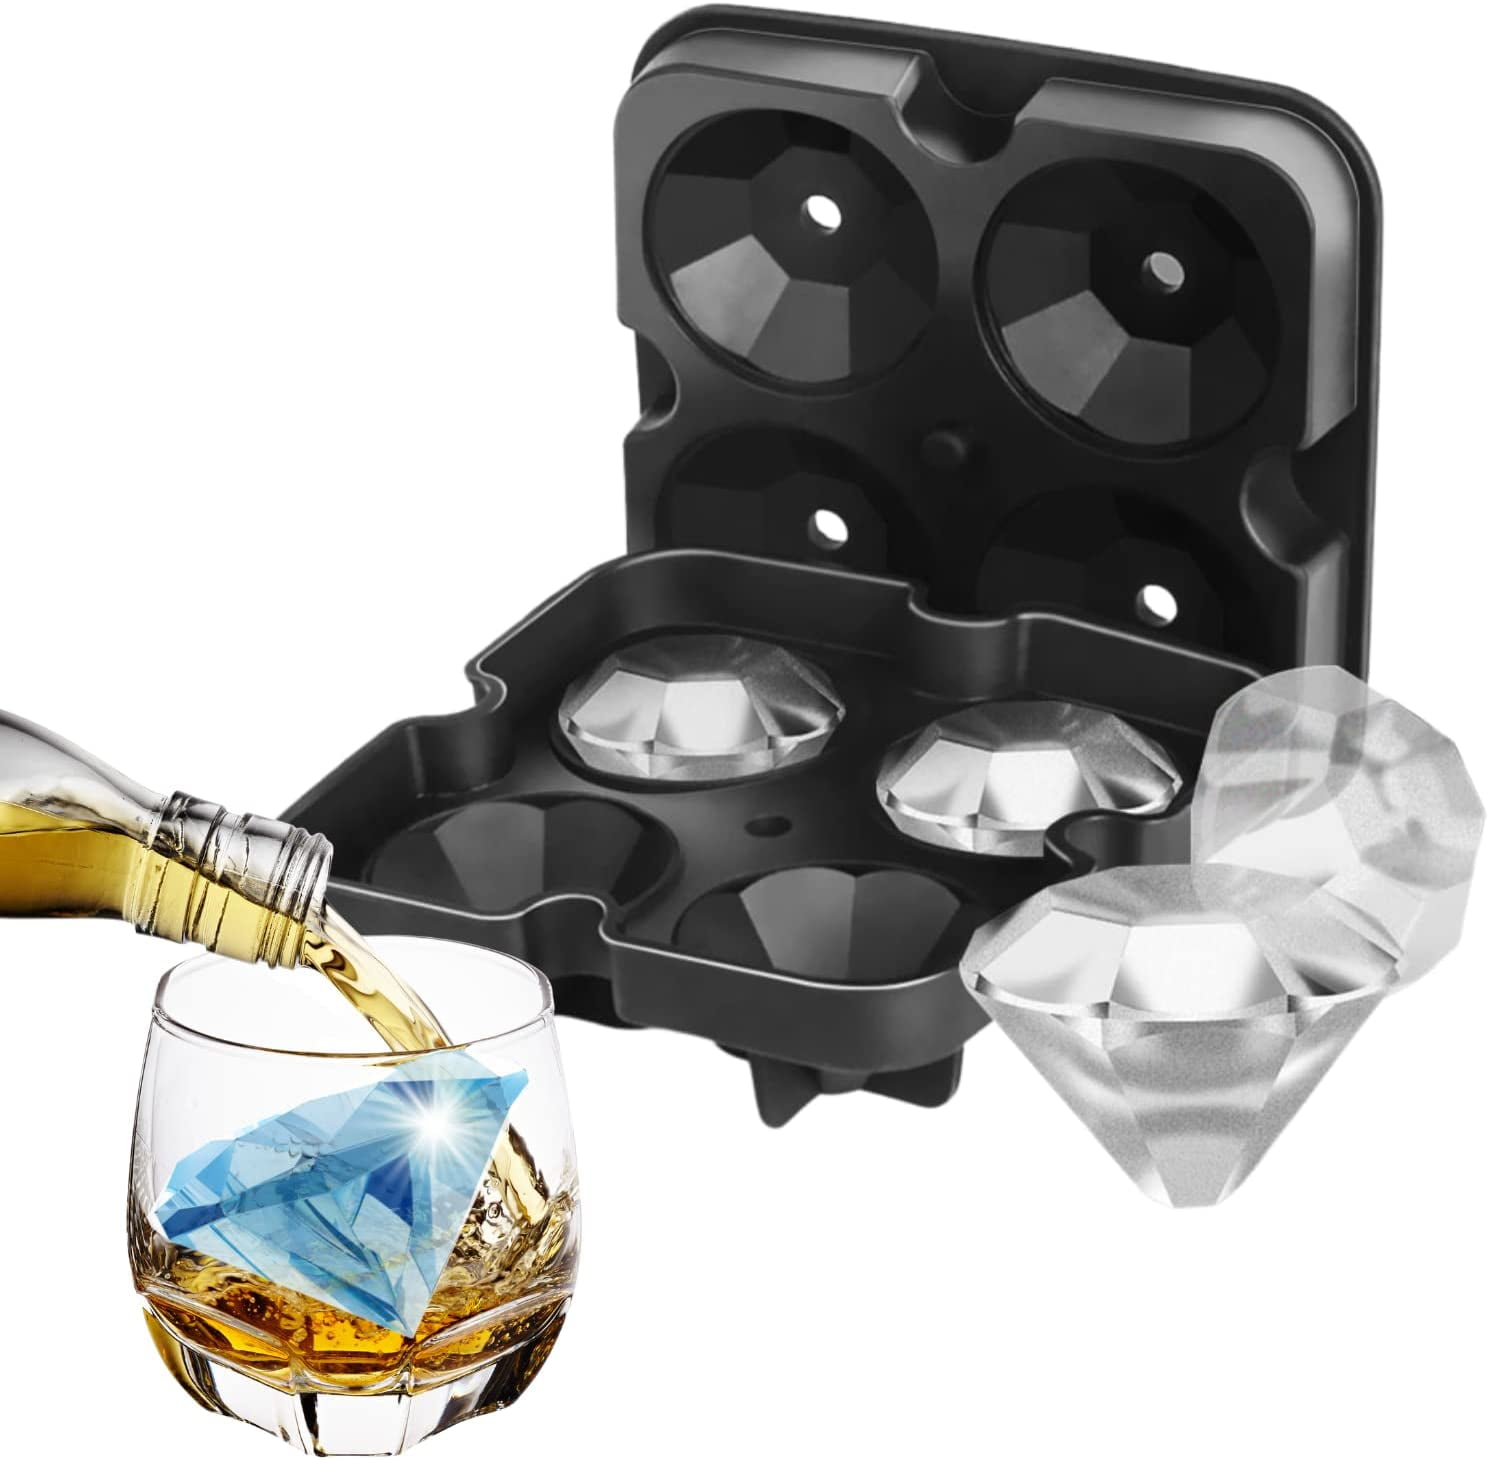 SAWNZC Ice Cube Trays Diamond Ice Cube Molds Reusable Silicone Flexible 4 Ice Trays Maker with Lid for Chilling Whiskey Cocktails, Funnel Included, Easy